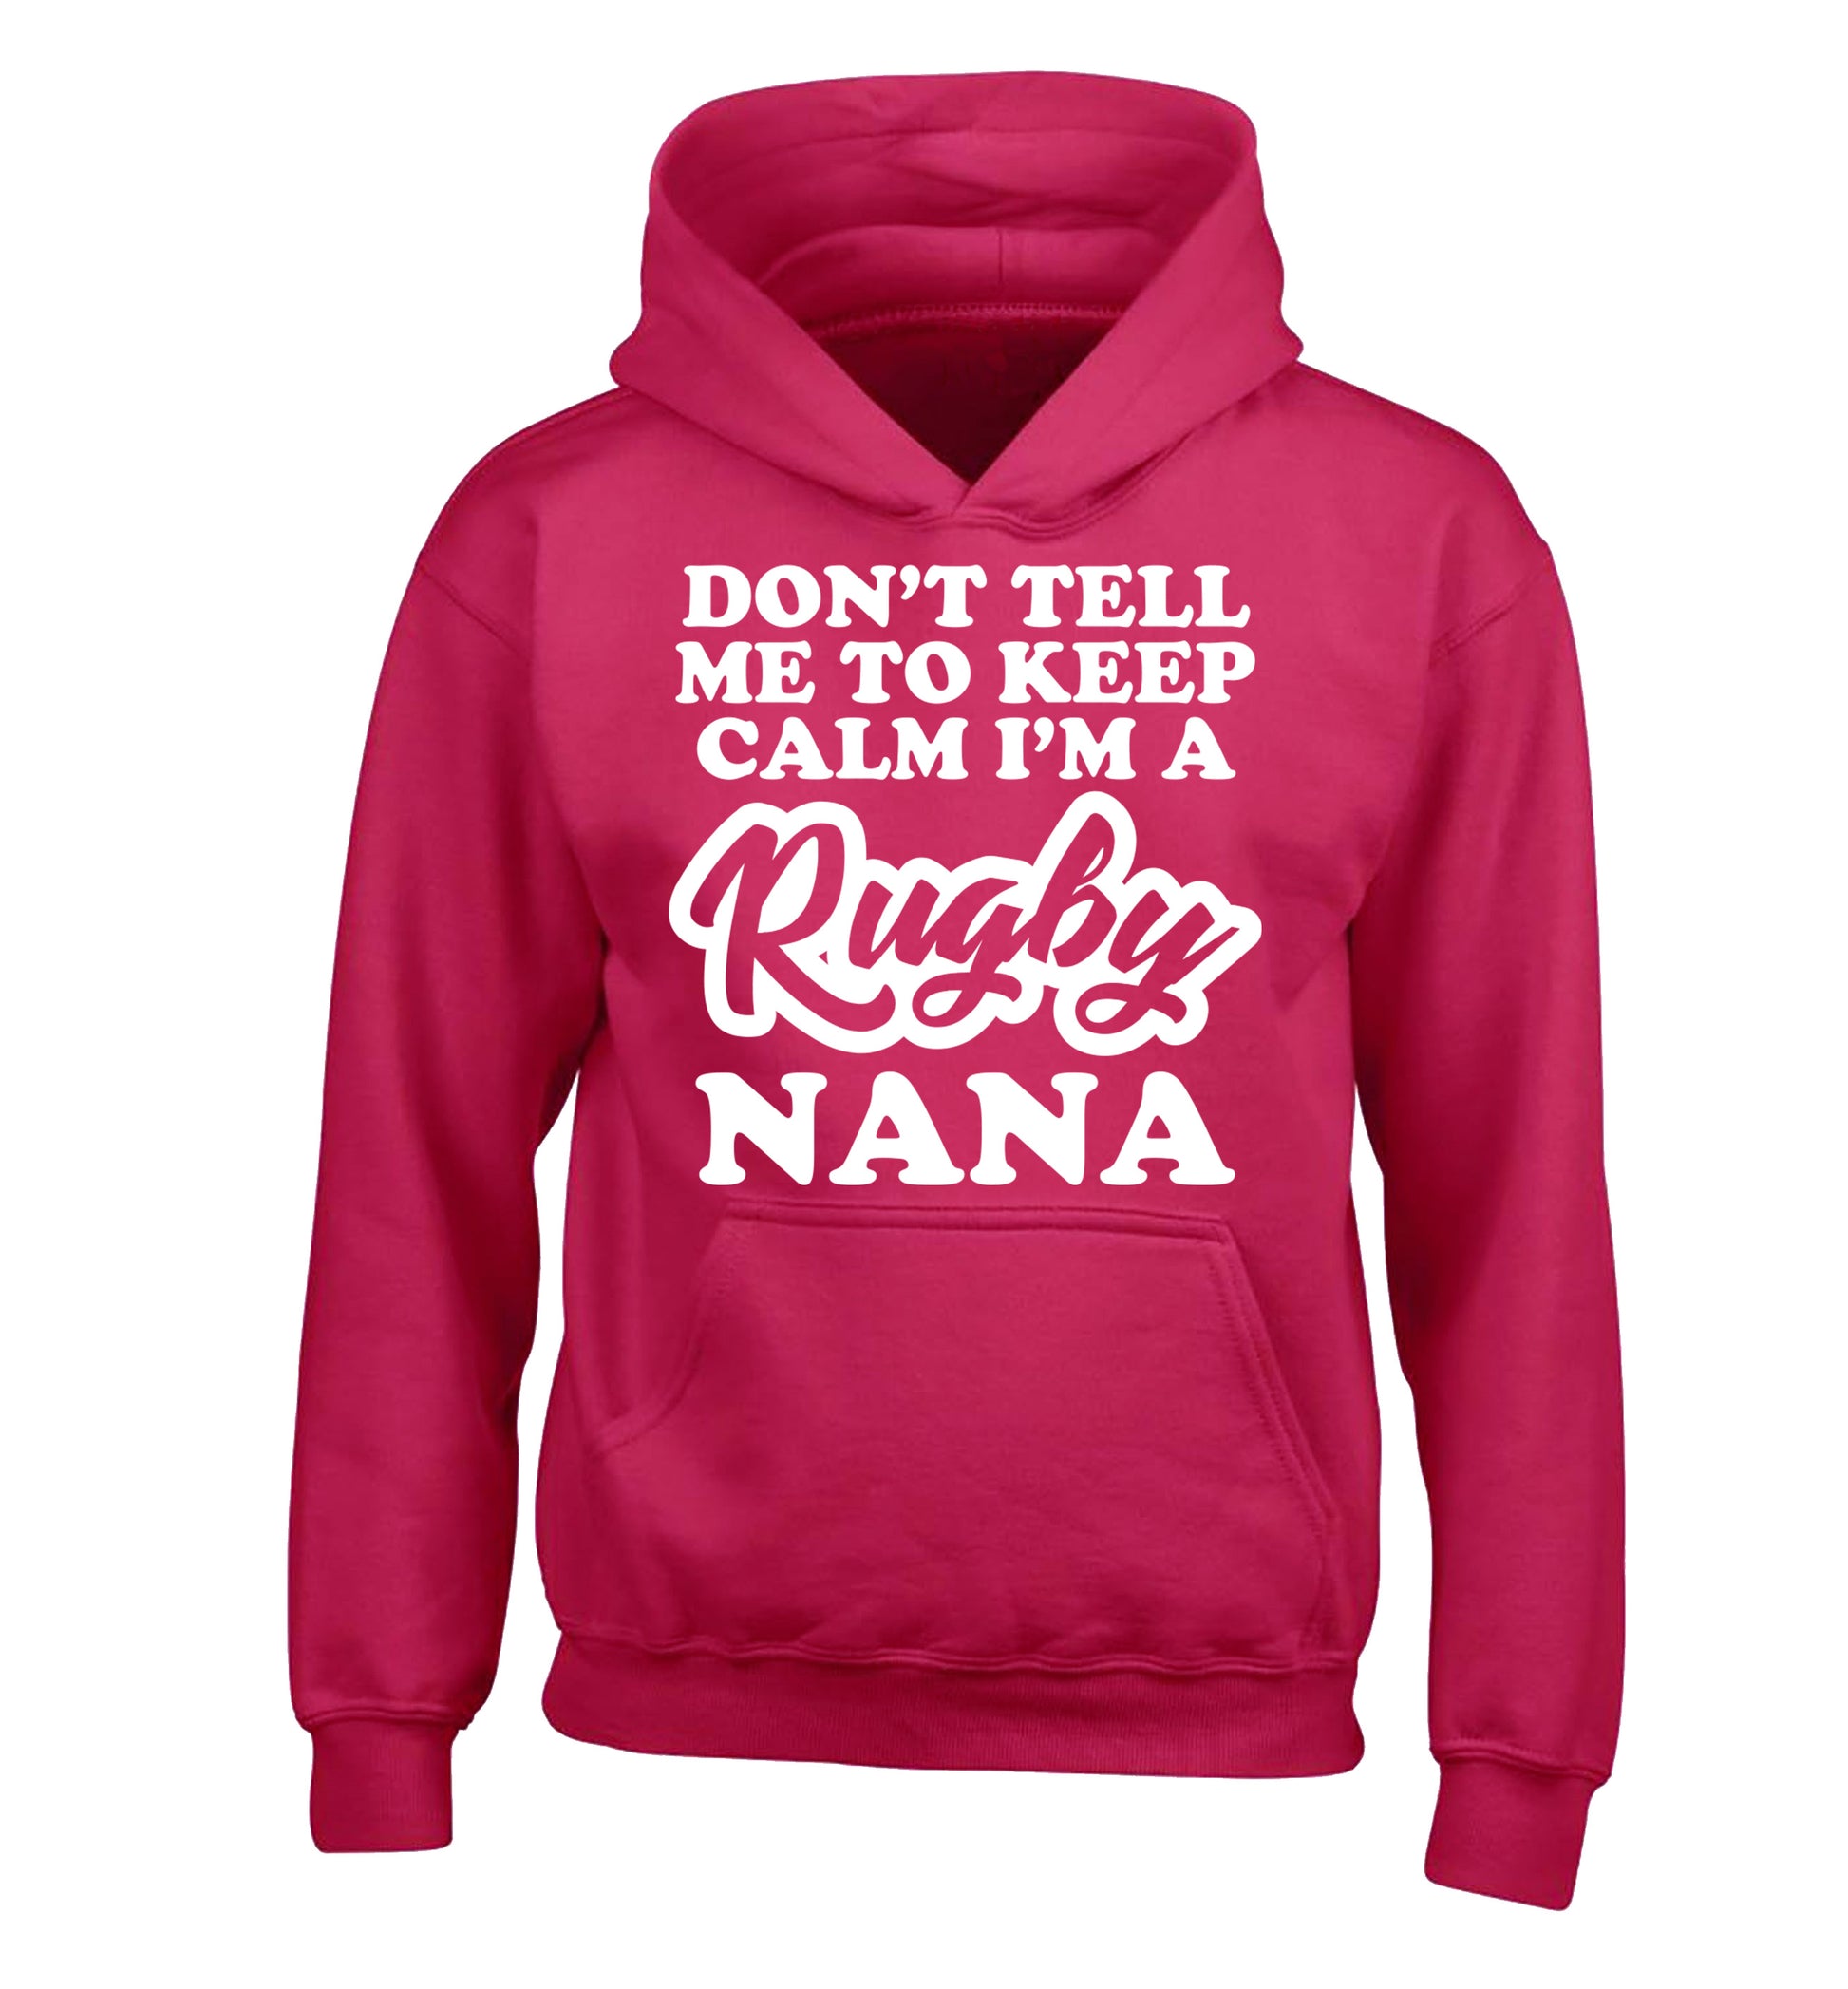 Don't tell me to keep calm I'm a rugby nana children's pink hoodie 12-13 Years